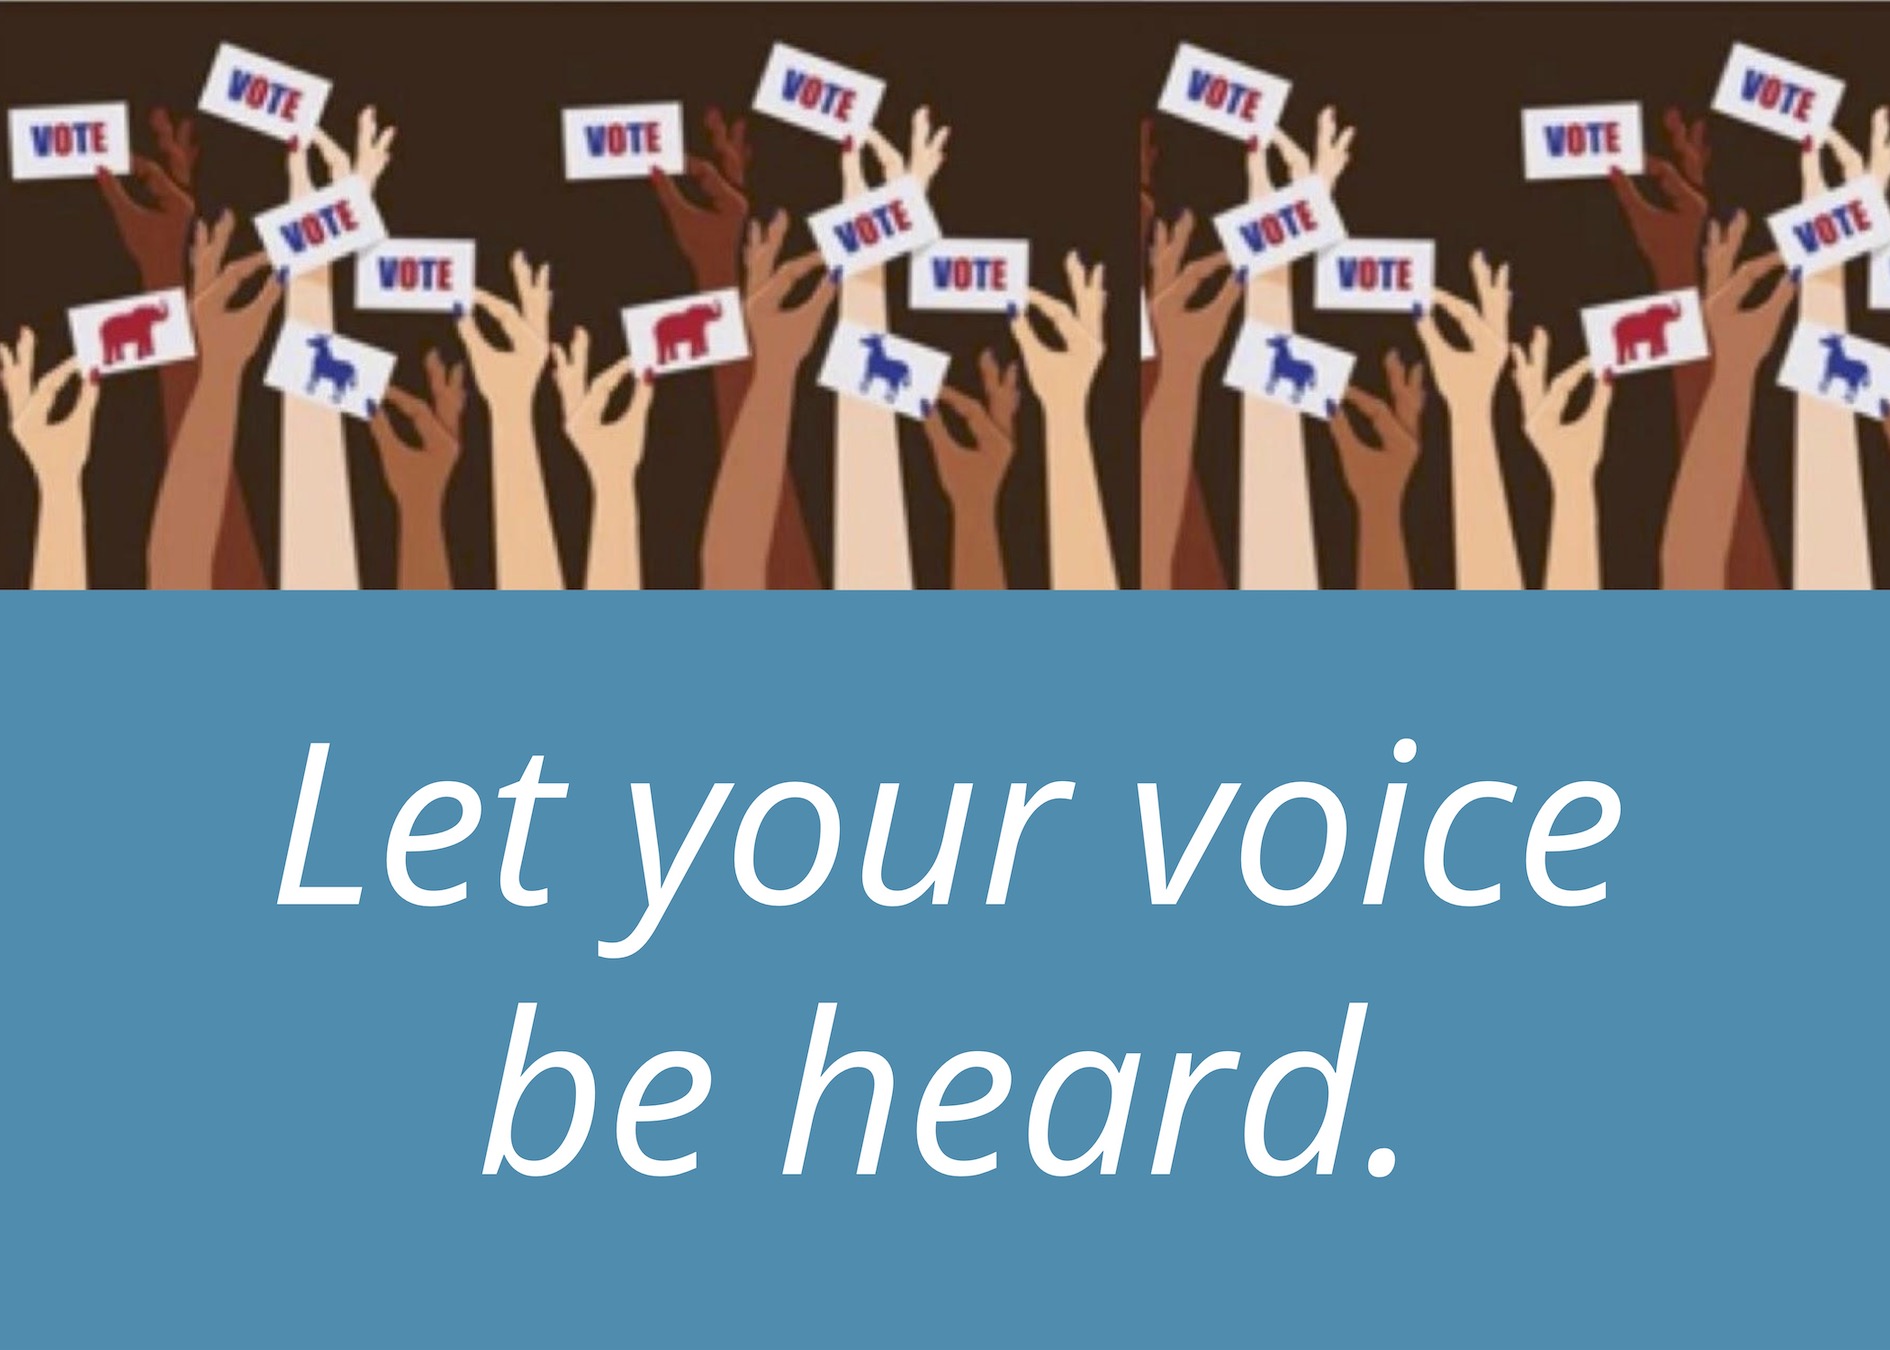 illustration of hands raised holding signs that say "vote" and text "Let your voice be heard."